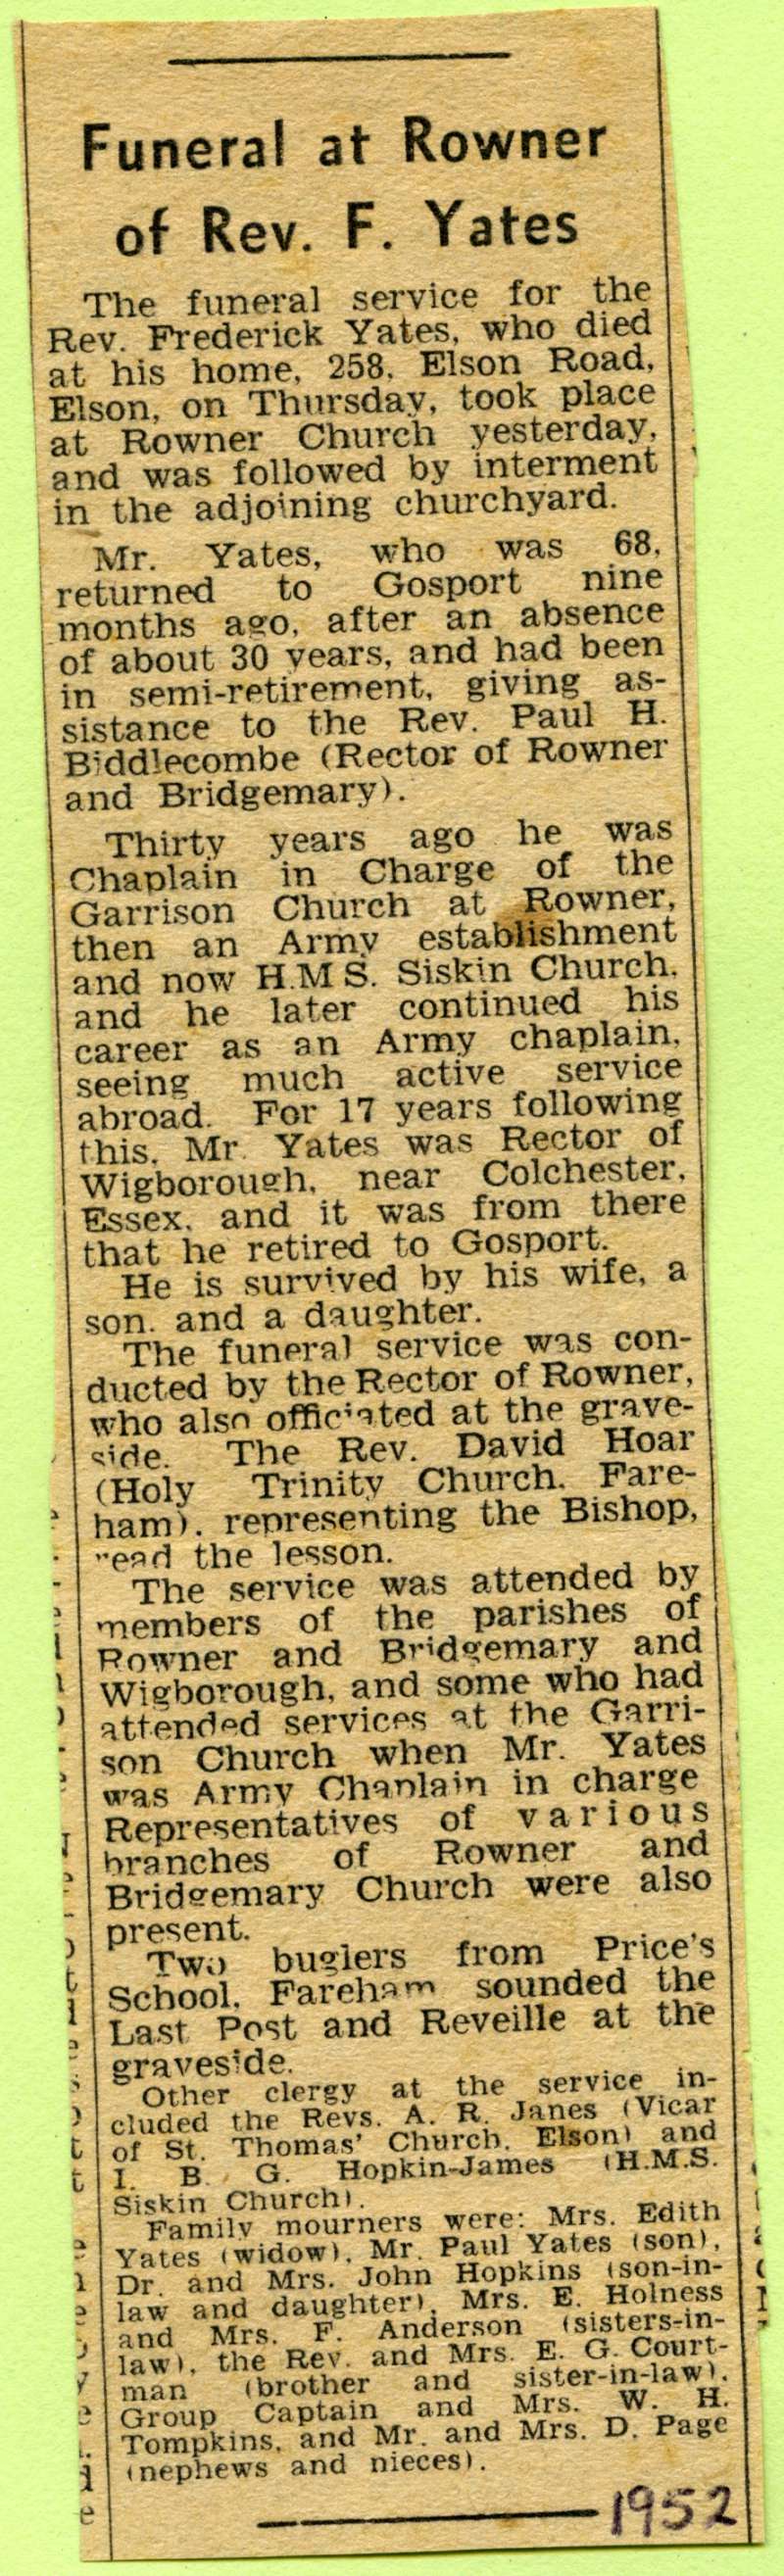 1. ID SG01_086_001 Funeral at Rowner of Rev. F. Yates. For 17 years he was Rector of Wigborough near Colchester.
Cat1 Places-->Wigborough